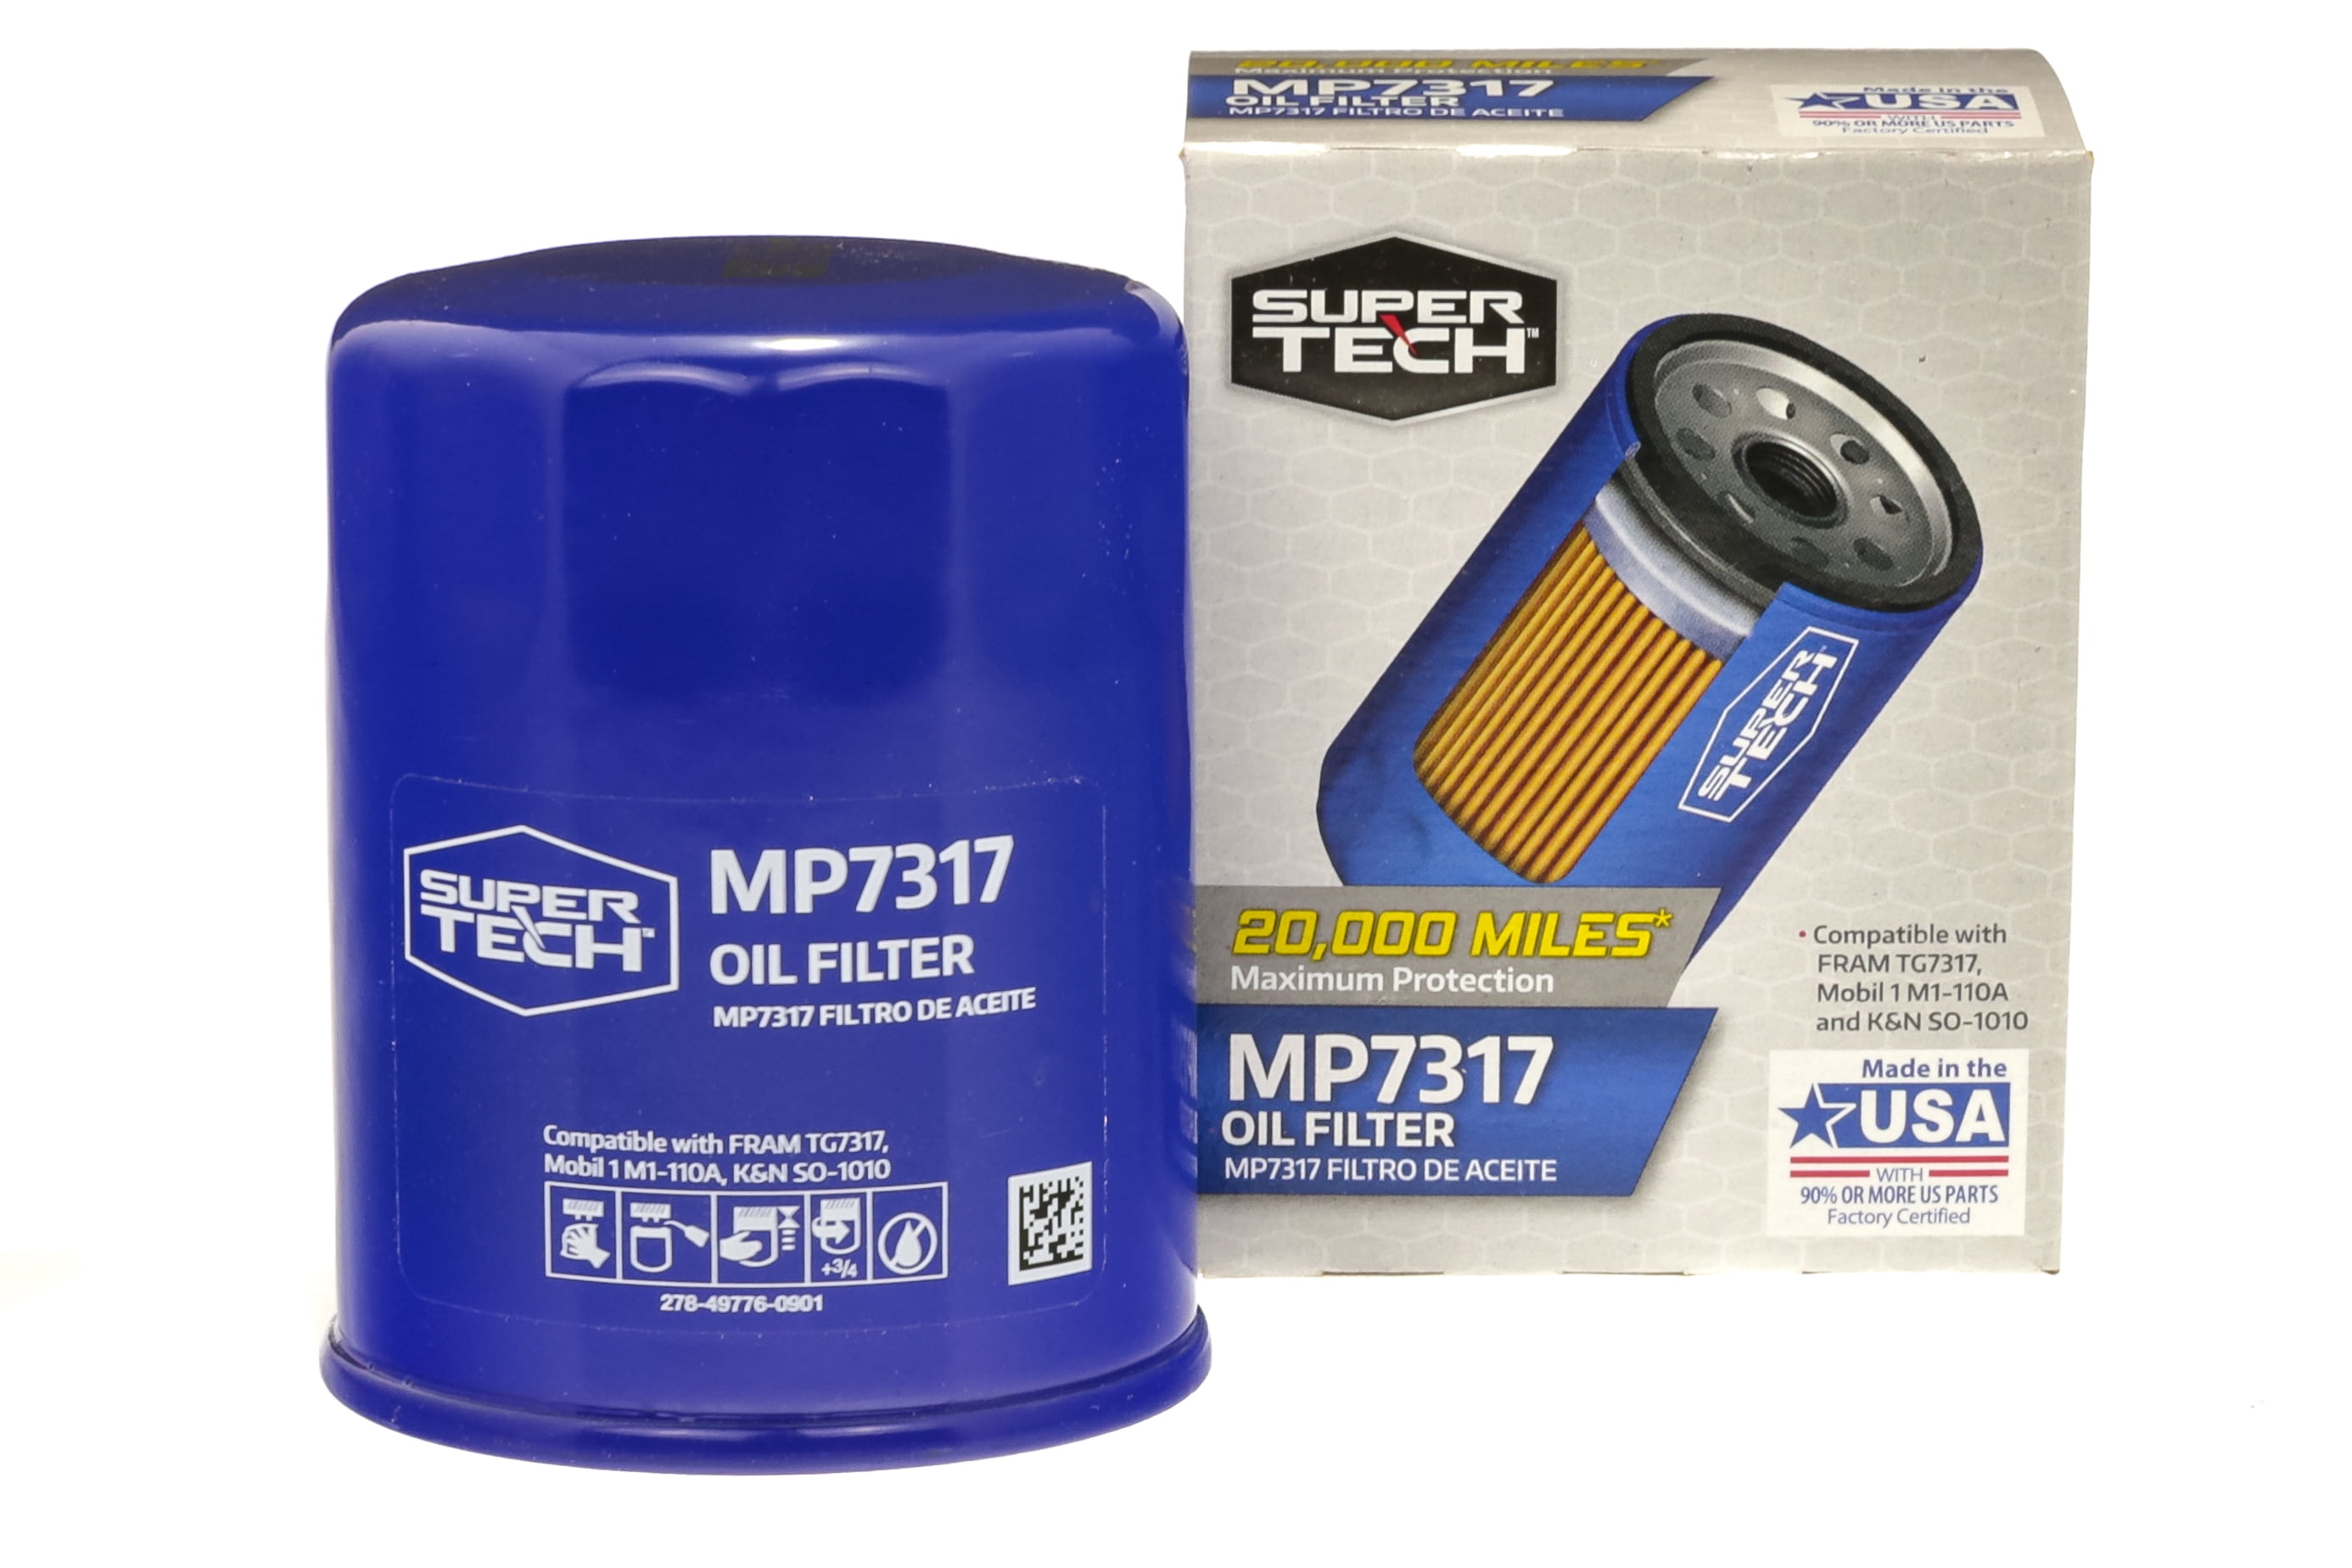 SuperTech Maximum Performance 20,000 mile Replacement Synthetic Oil Filter, MP7317, for Acura, Honda, Infiniti, Nissan and Subaru